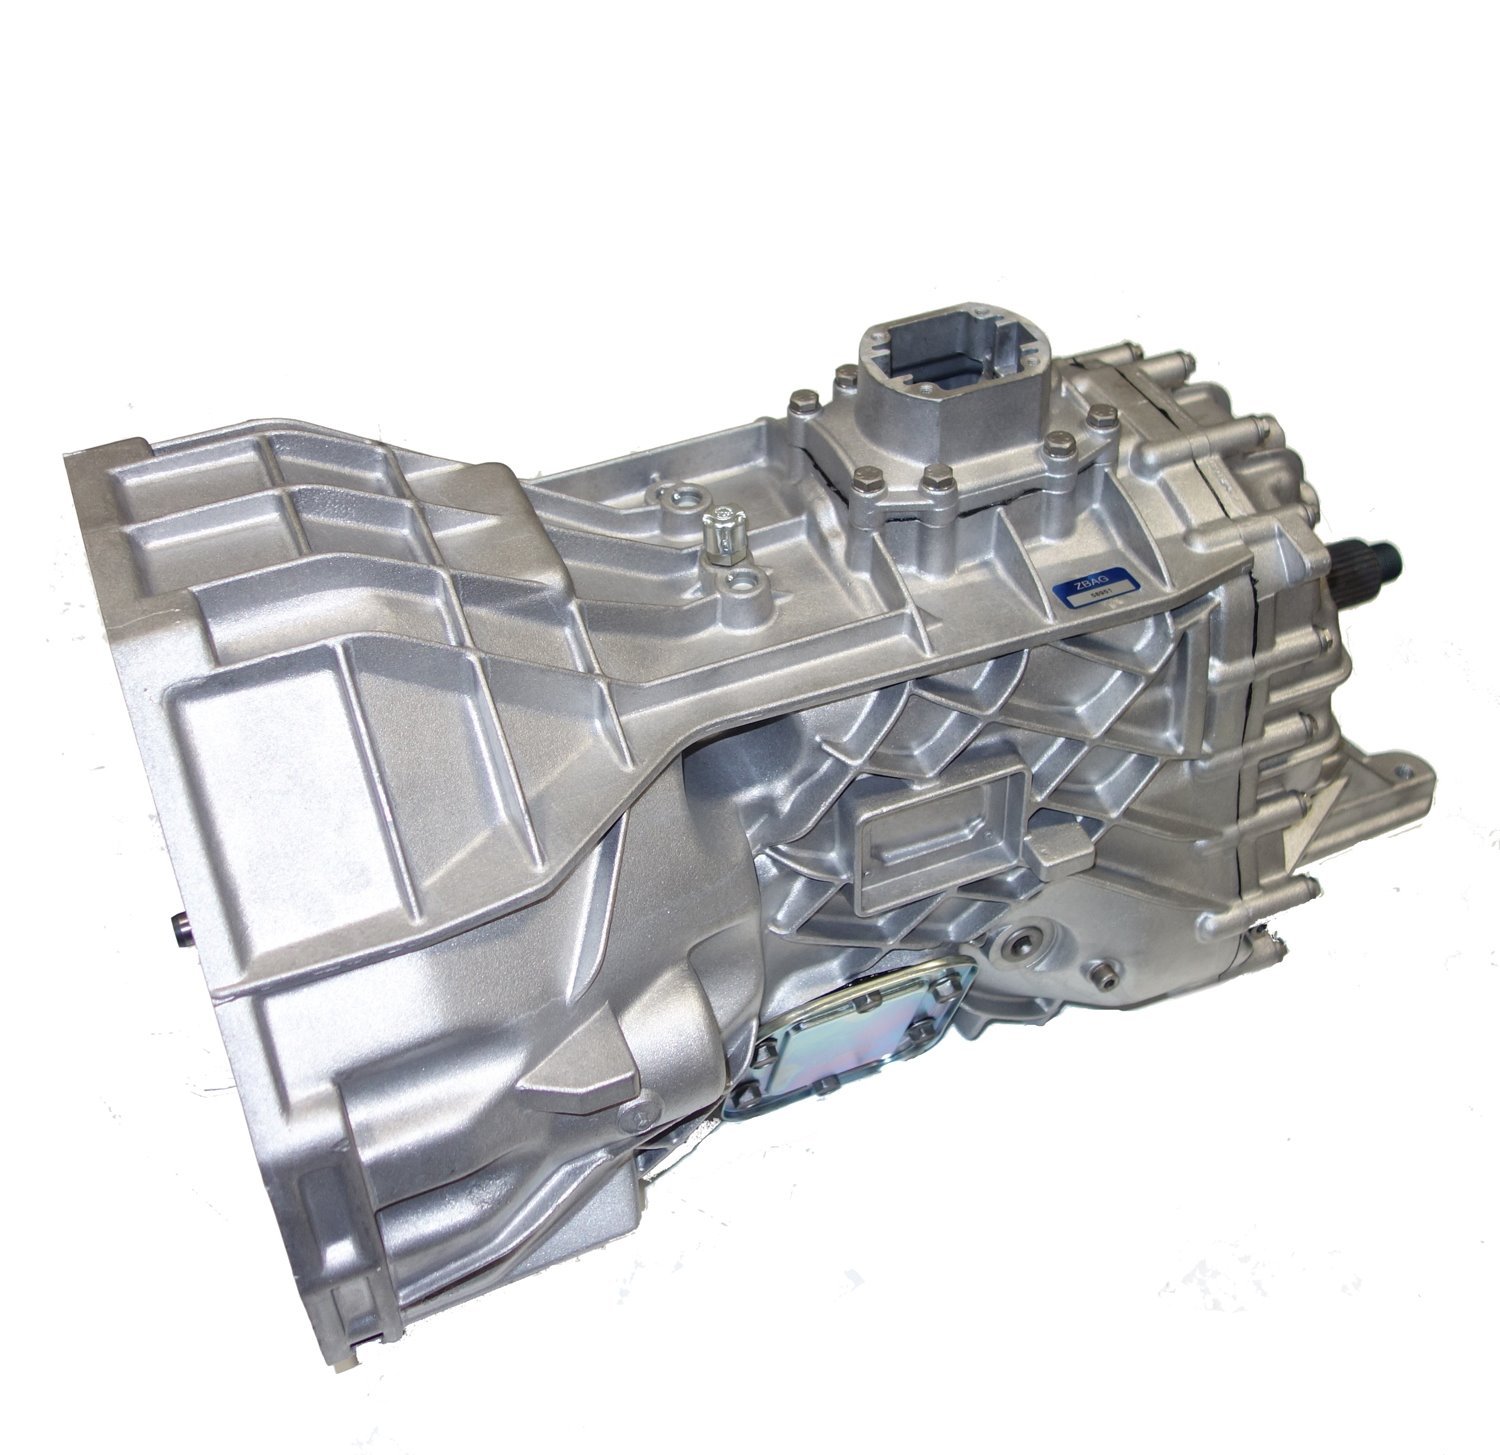 Remanufactured S5-47 Man. Trans, 96-97 F-series 7.5L, 2WD, 5Spd, No PTO used